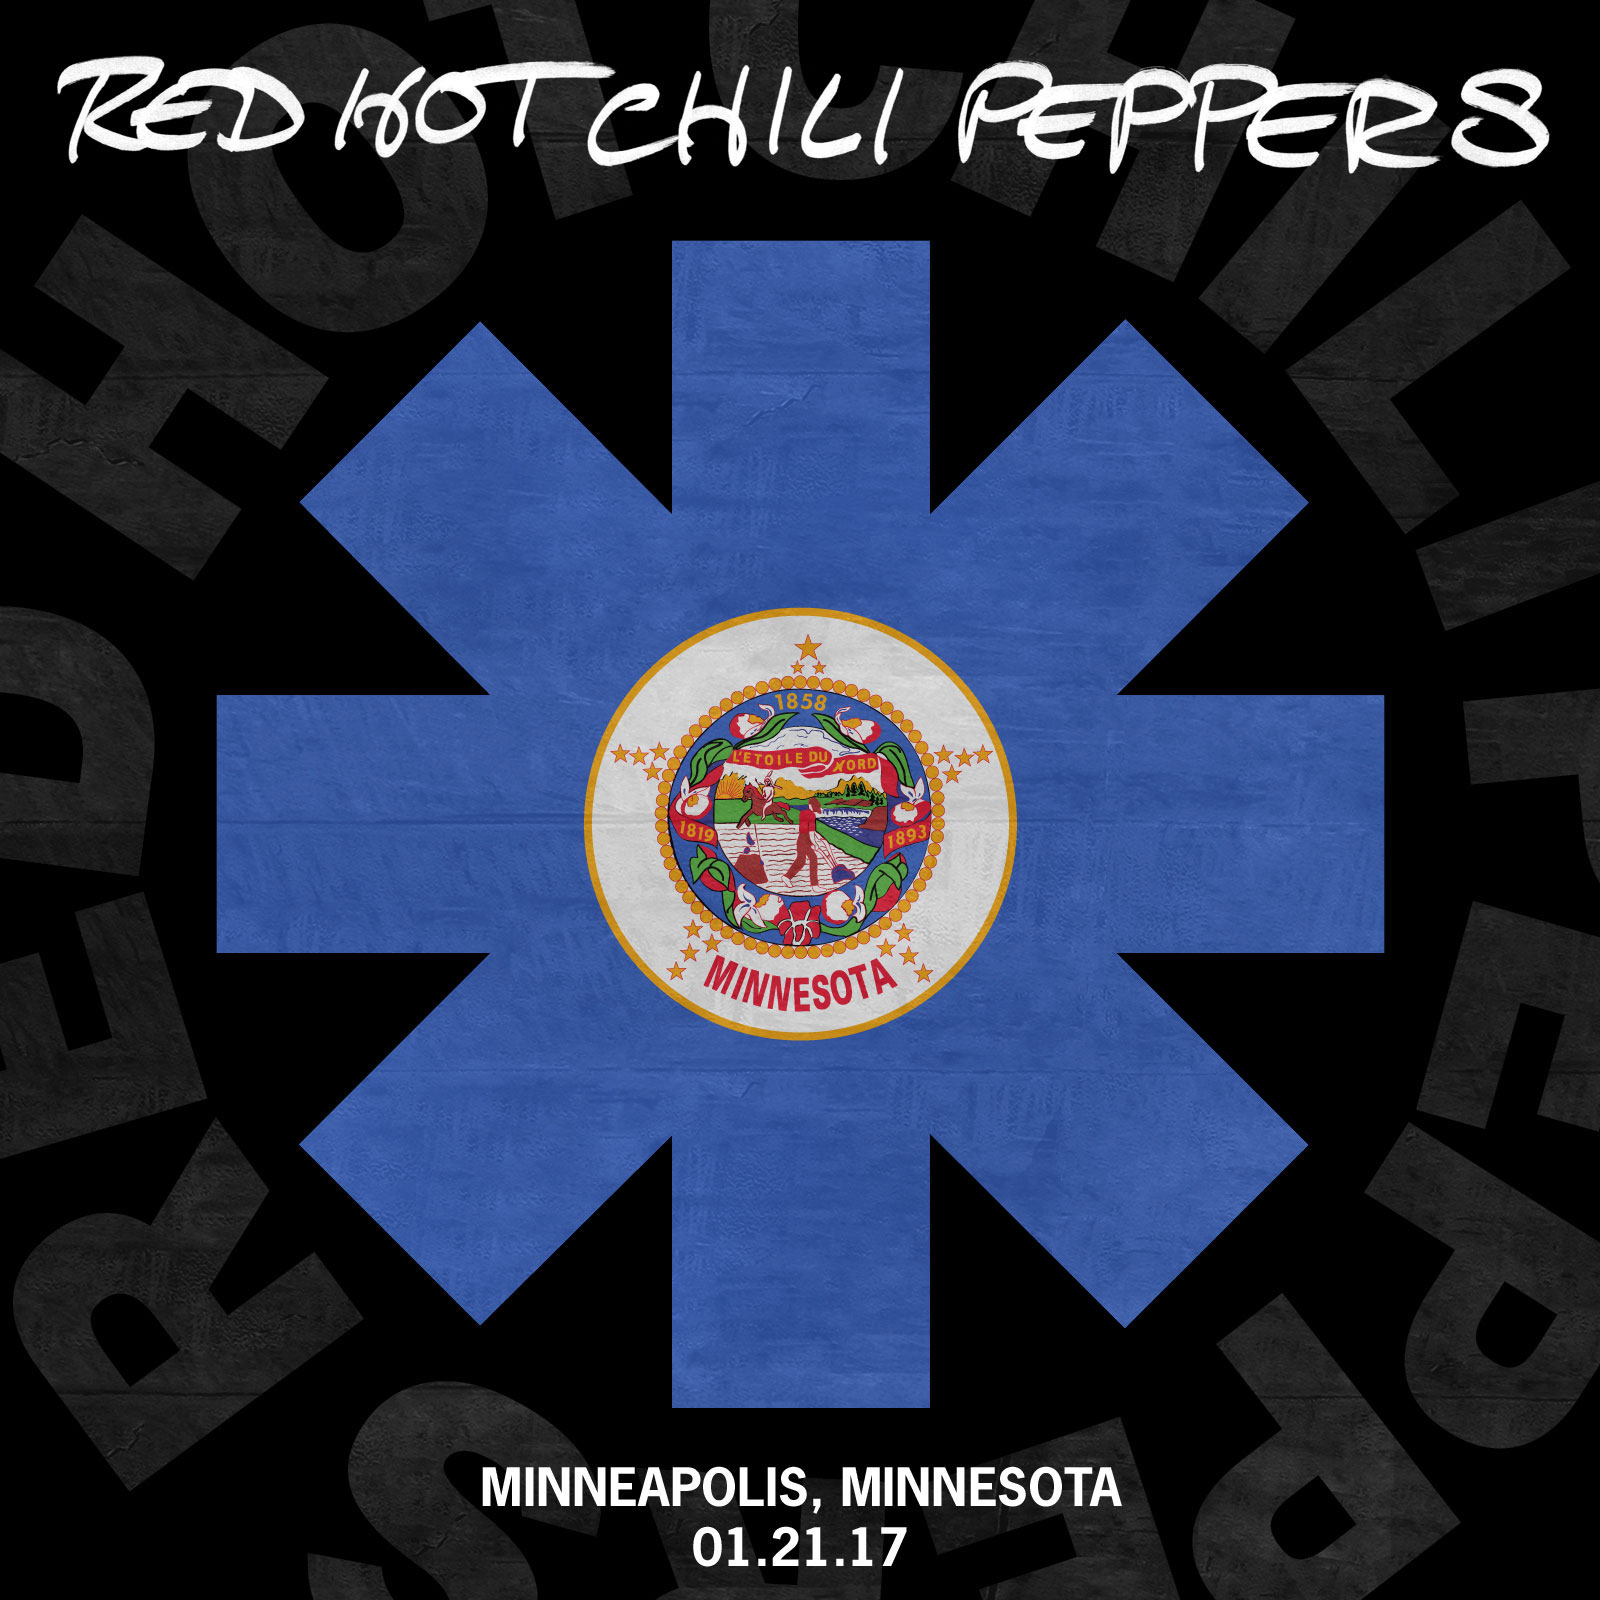 Red hot peppers mp3. Scar Tissue Red hot Chili Peppers. RHCP scar Tissue. Патч Red hot Chili Peppers. RHCP Californication.